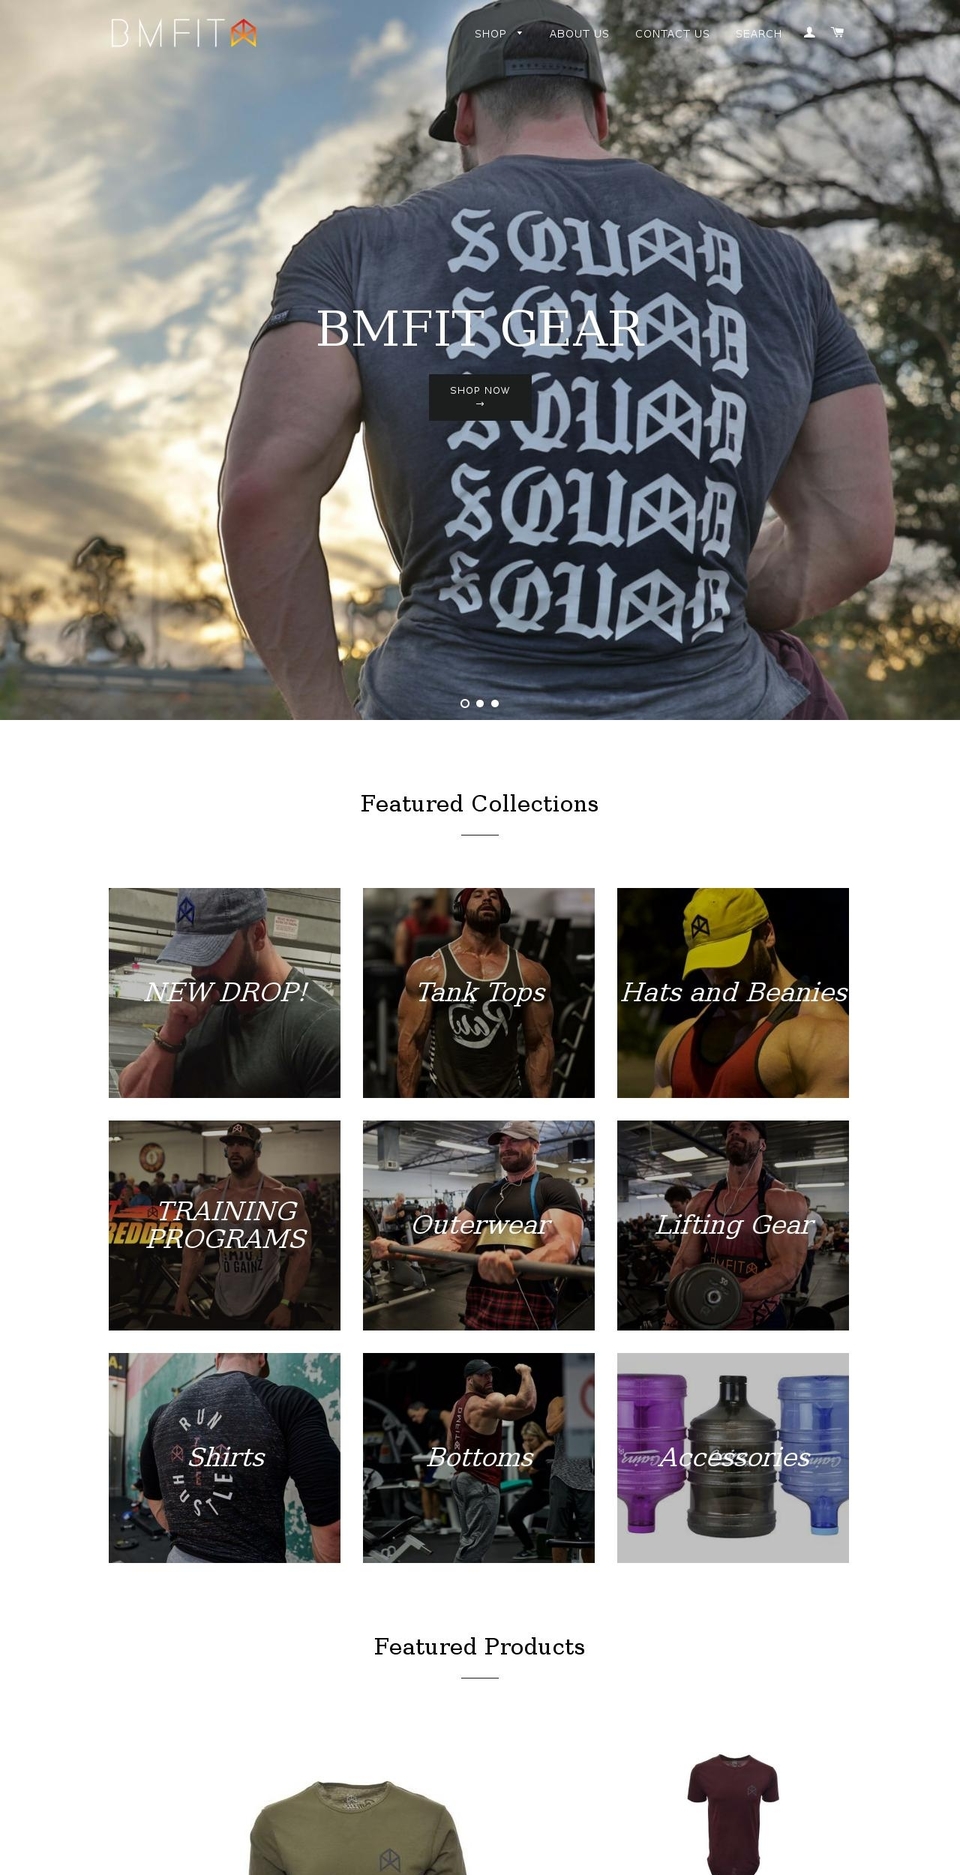 Best-Sellers-Restock Shopify theme site example bmfitgear.com